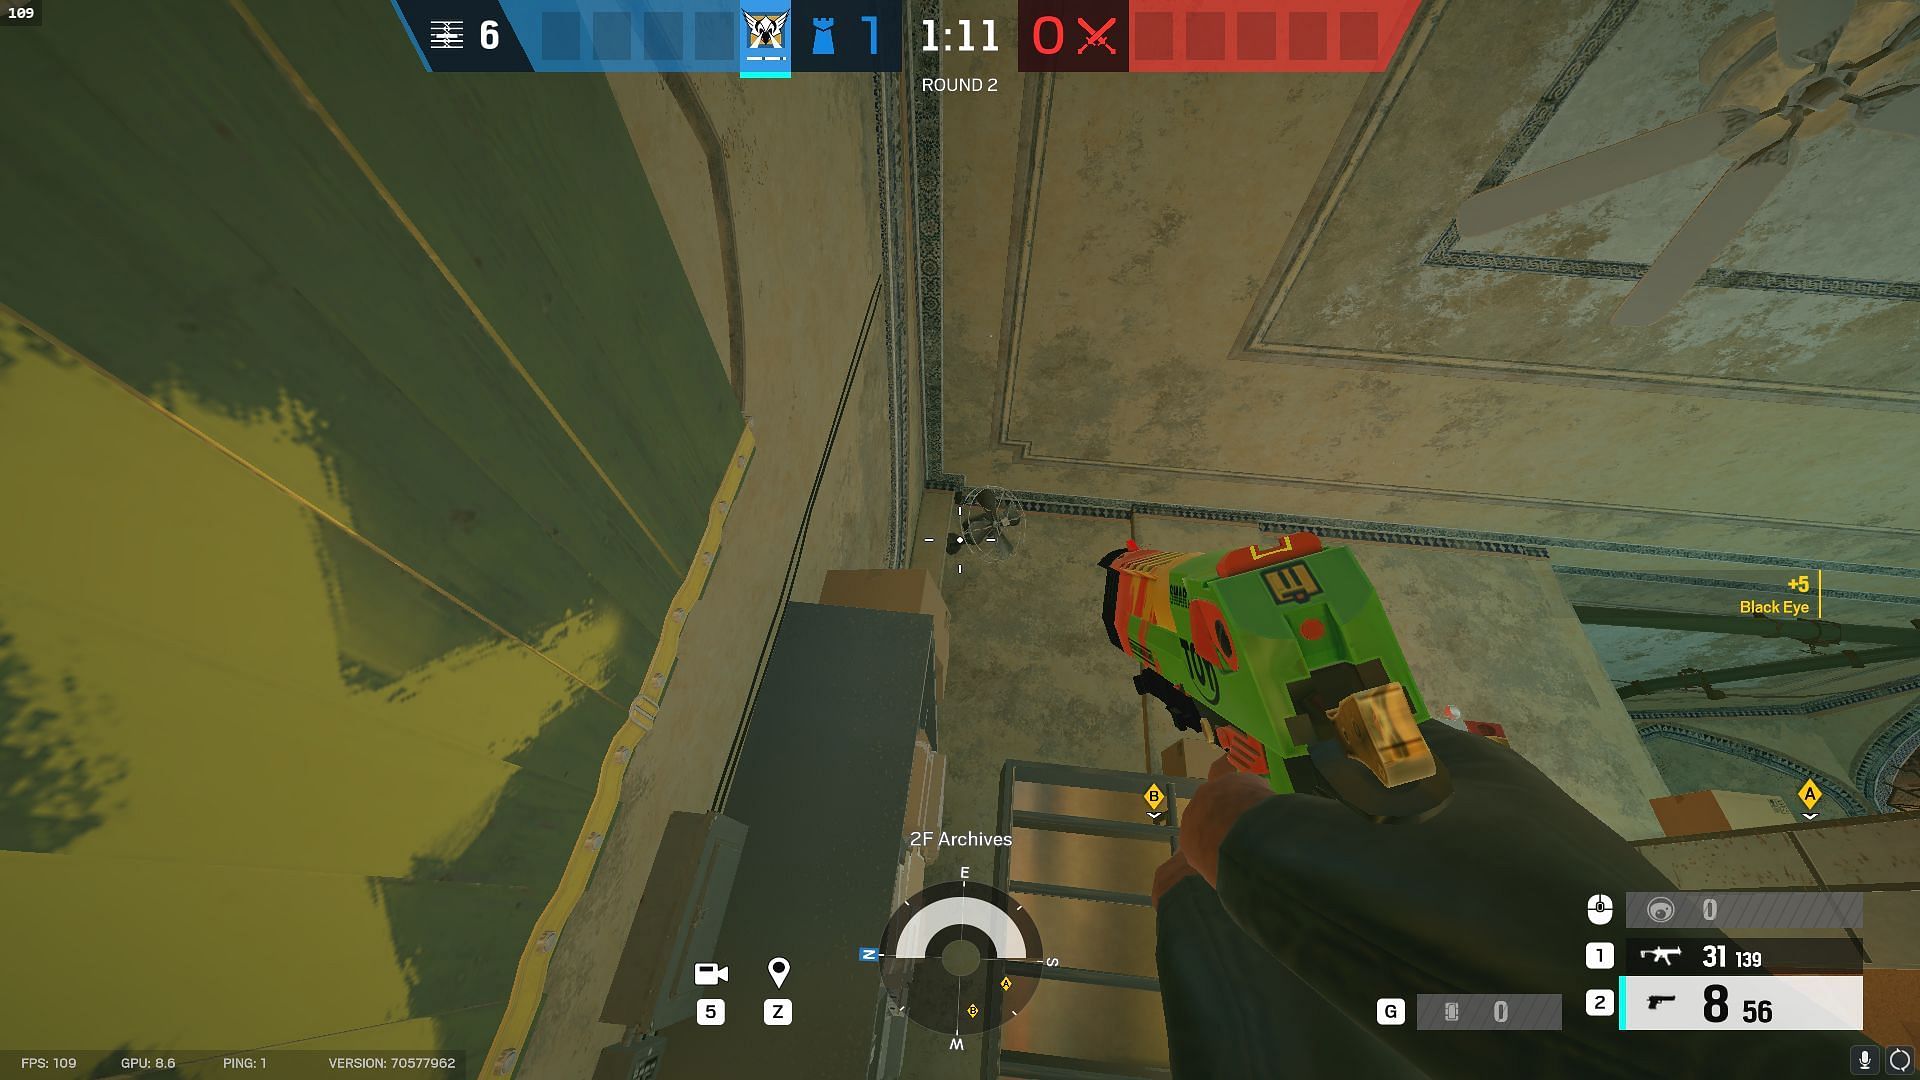 One of the hidden Archives Valkyrie camera spots in Rainbow Six Siege (Image via Ubisoft)